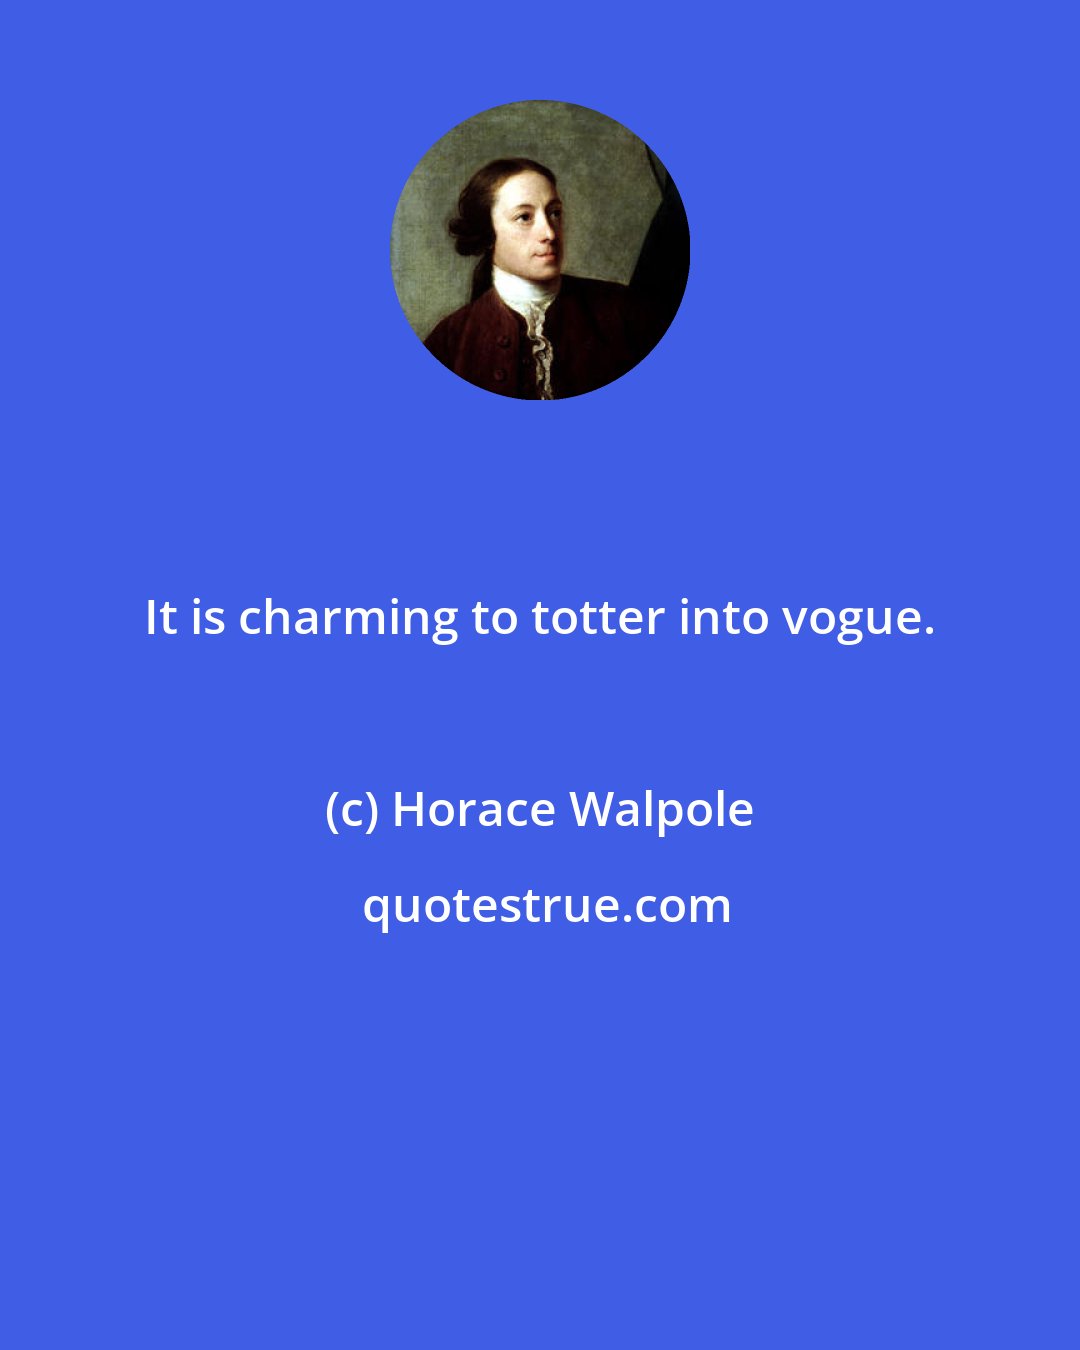 Horace Walpole: It is charming to totter into vogue.